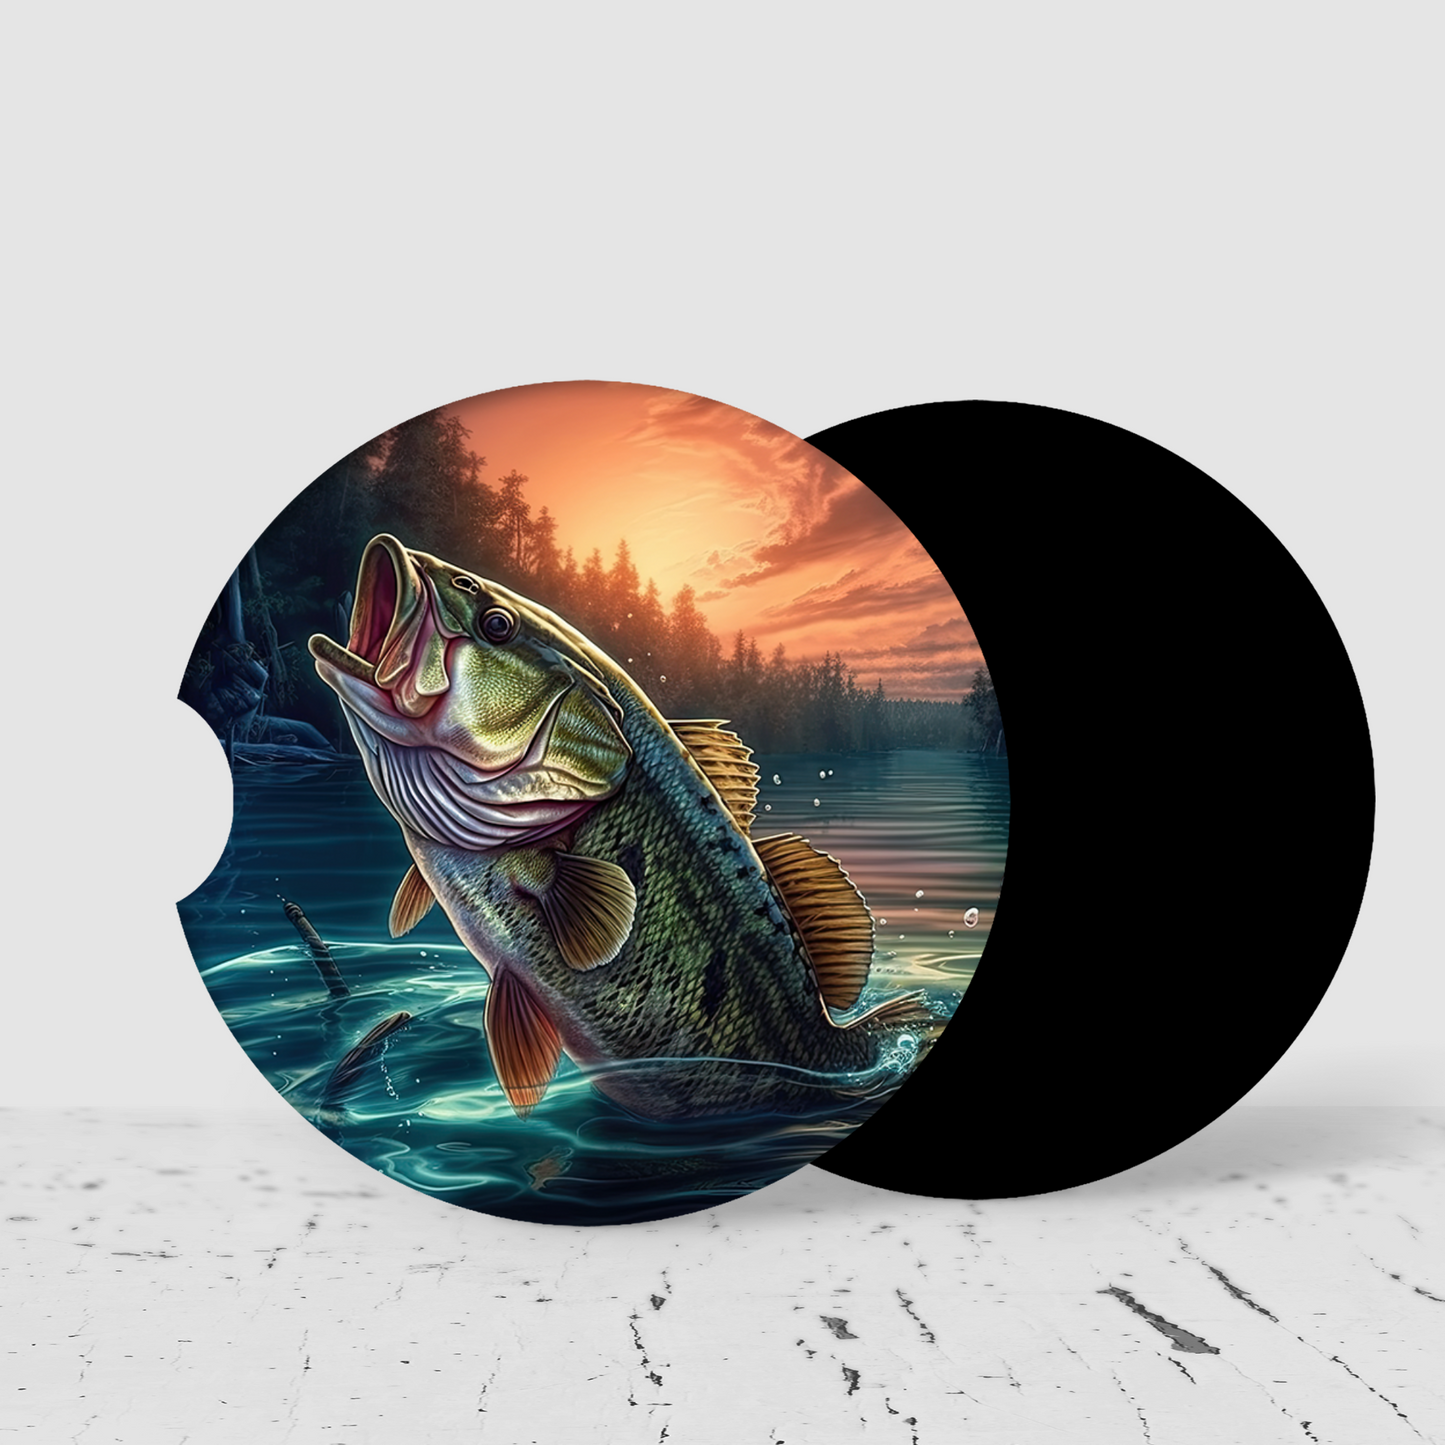 Premium Neoprene Car Coasters | Drink Holders for Your Car Console - Set of 2 Fishing Design